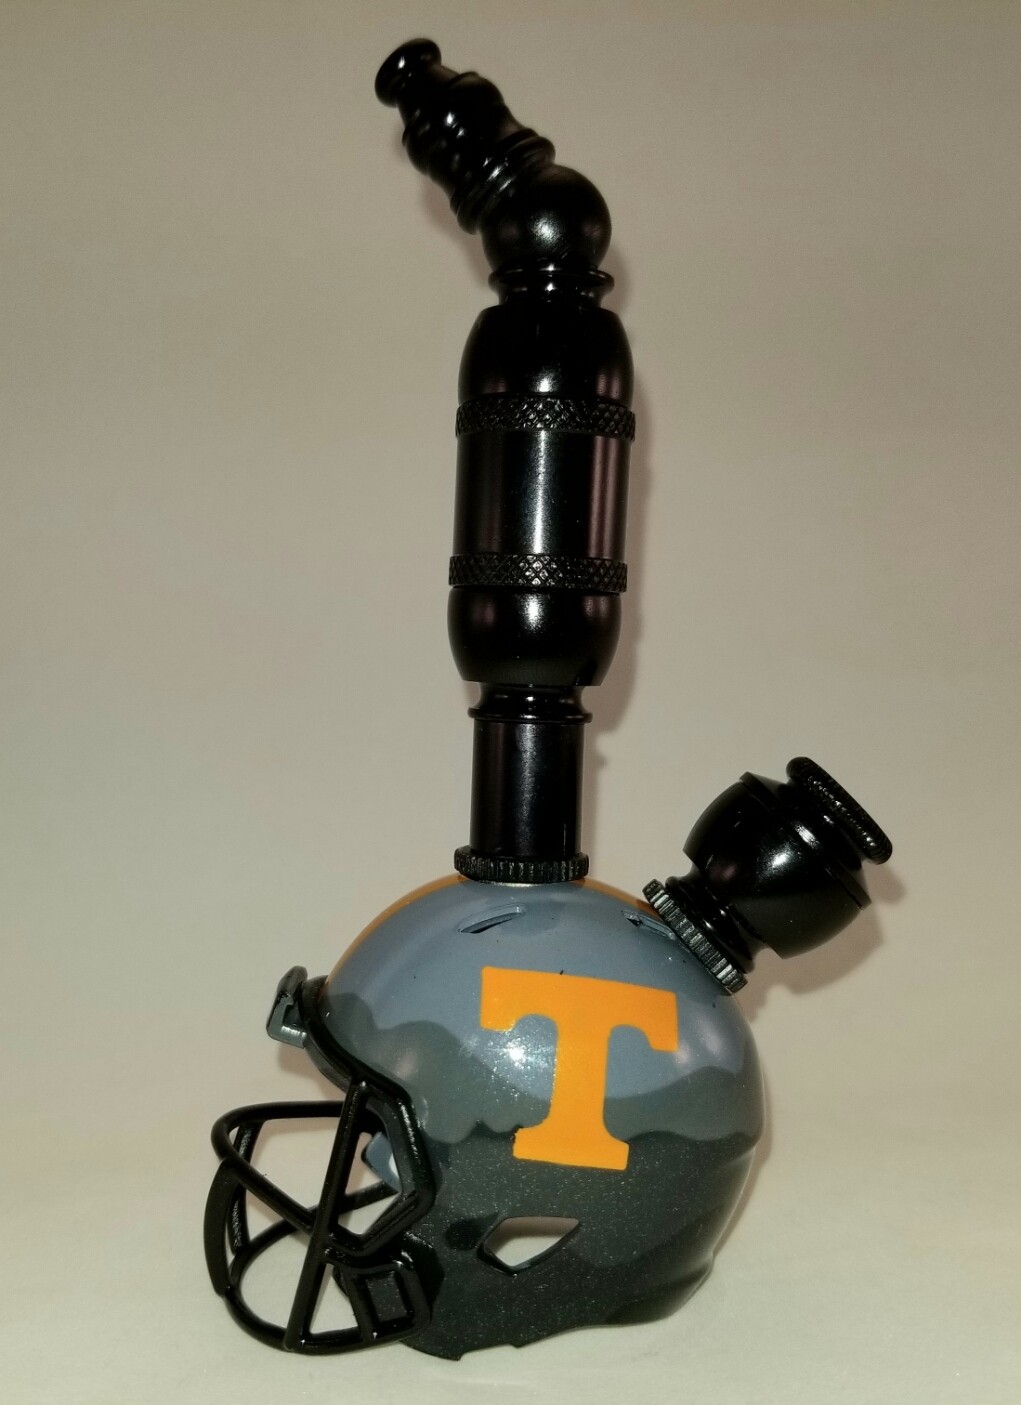 TENNESSEE VOLUNTEERS "BAD ASS" FOOTBALL HELMET SMOKING PIPE Upright/Black Anodized